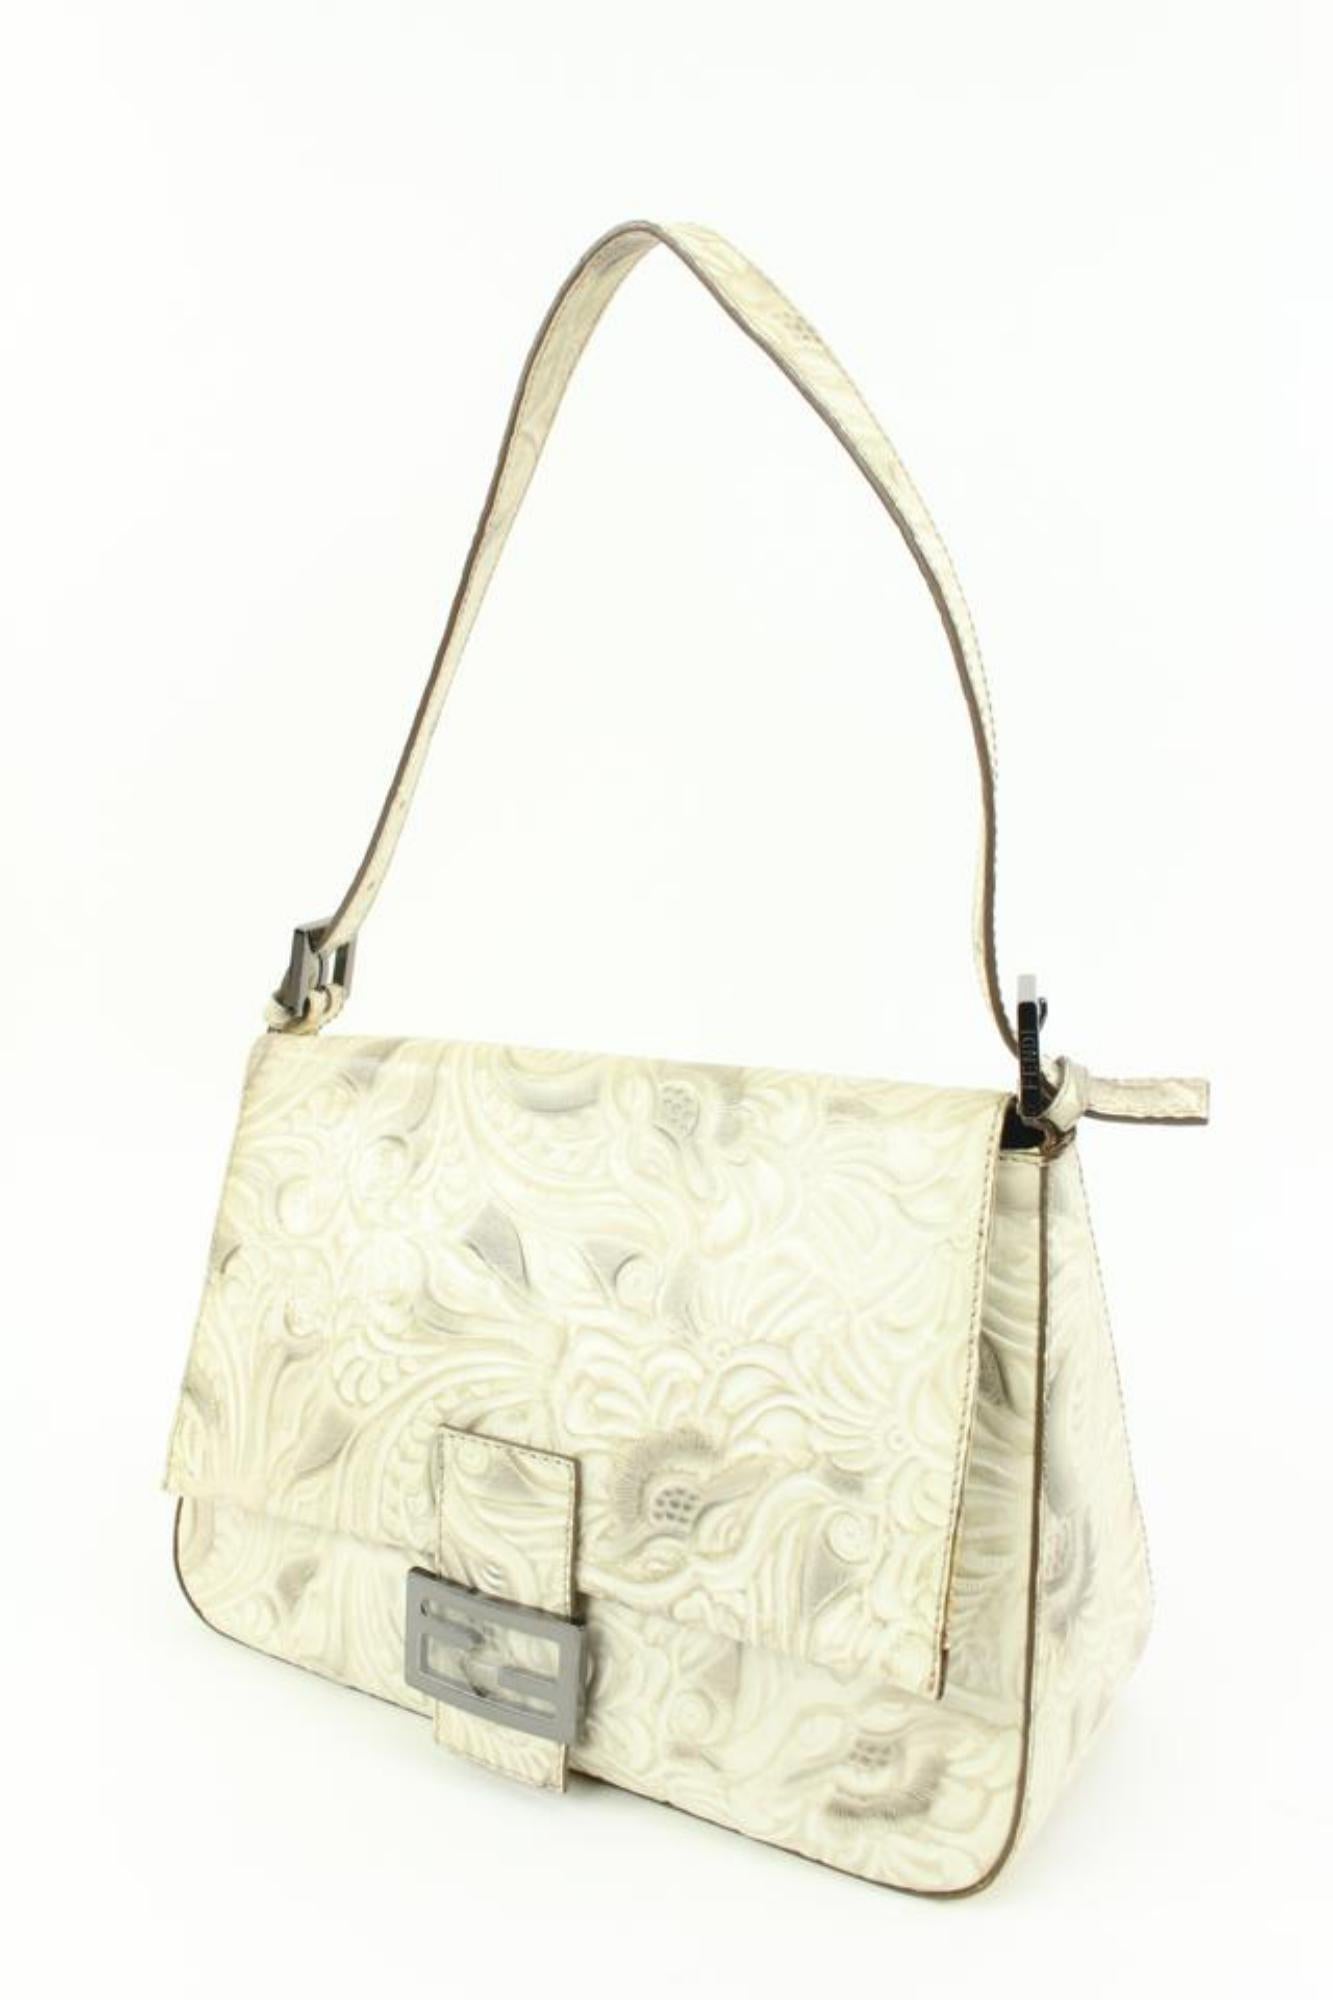 Fendi Ivory Embossed Flower Mama Forever Bag Floral 1f310s
Date Code/Serial Number: 2119-8BR001XXX (Very Faded)
Made In: Italy
Measurements: Length:  11.5